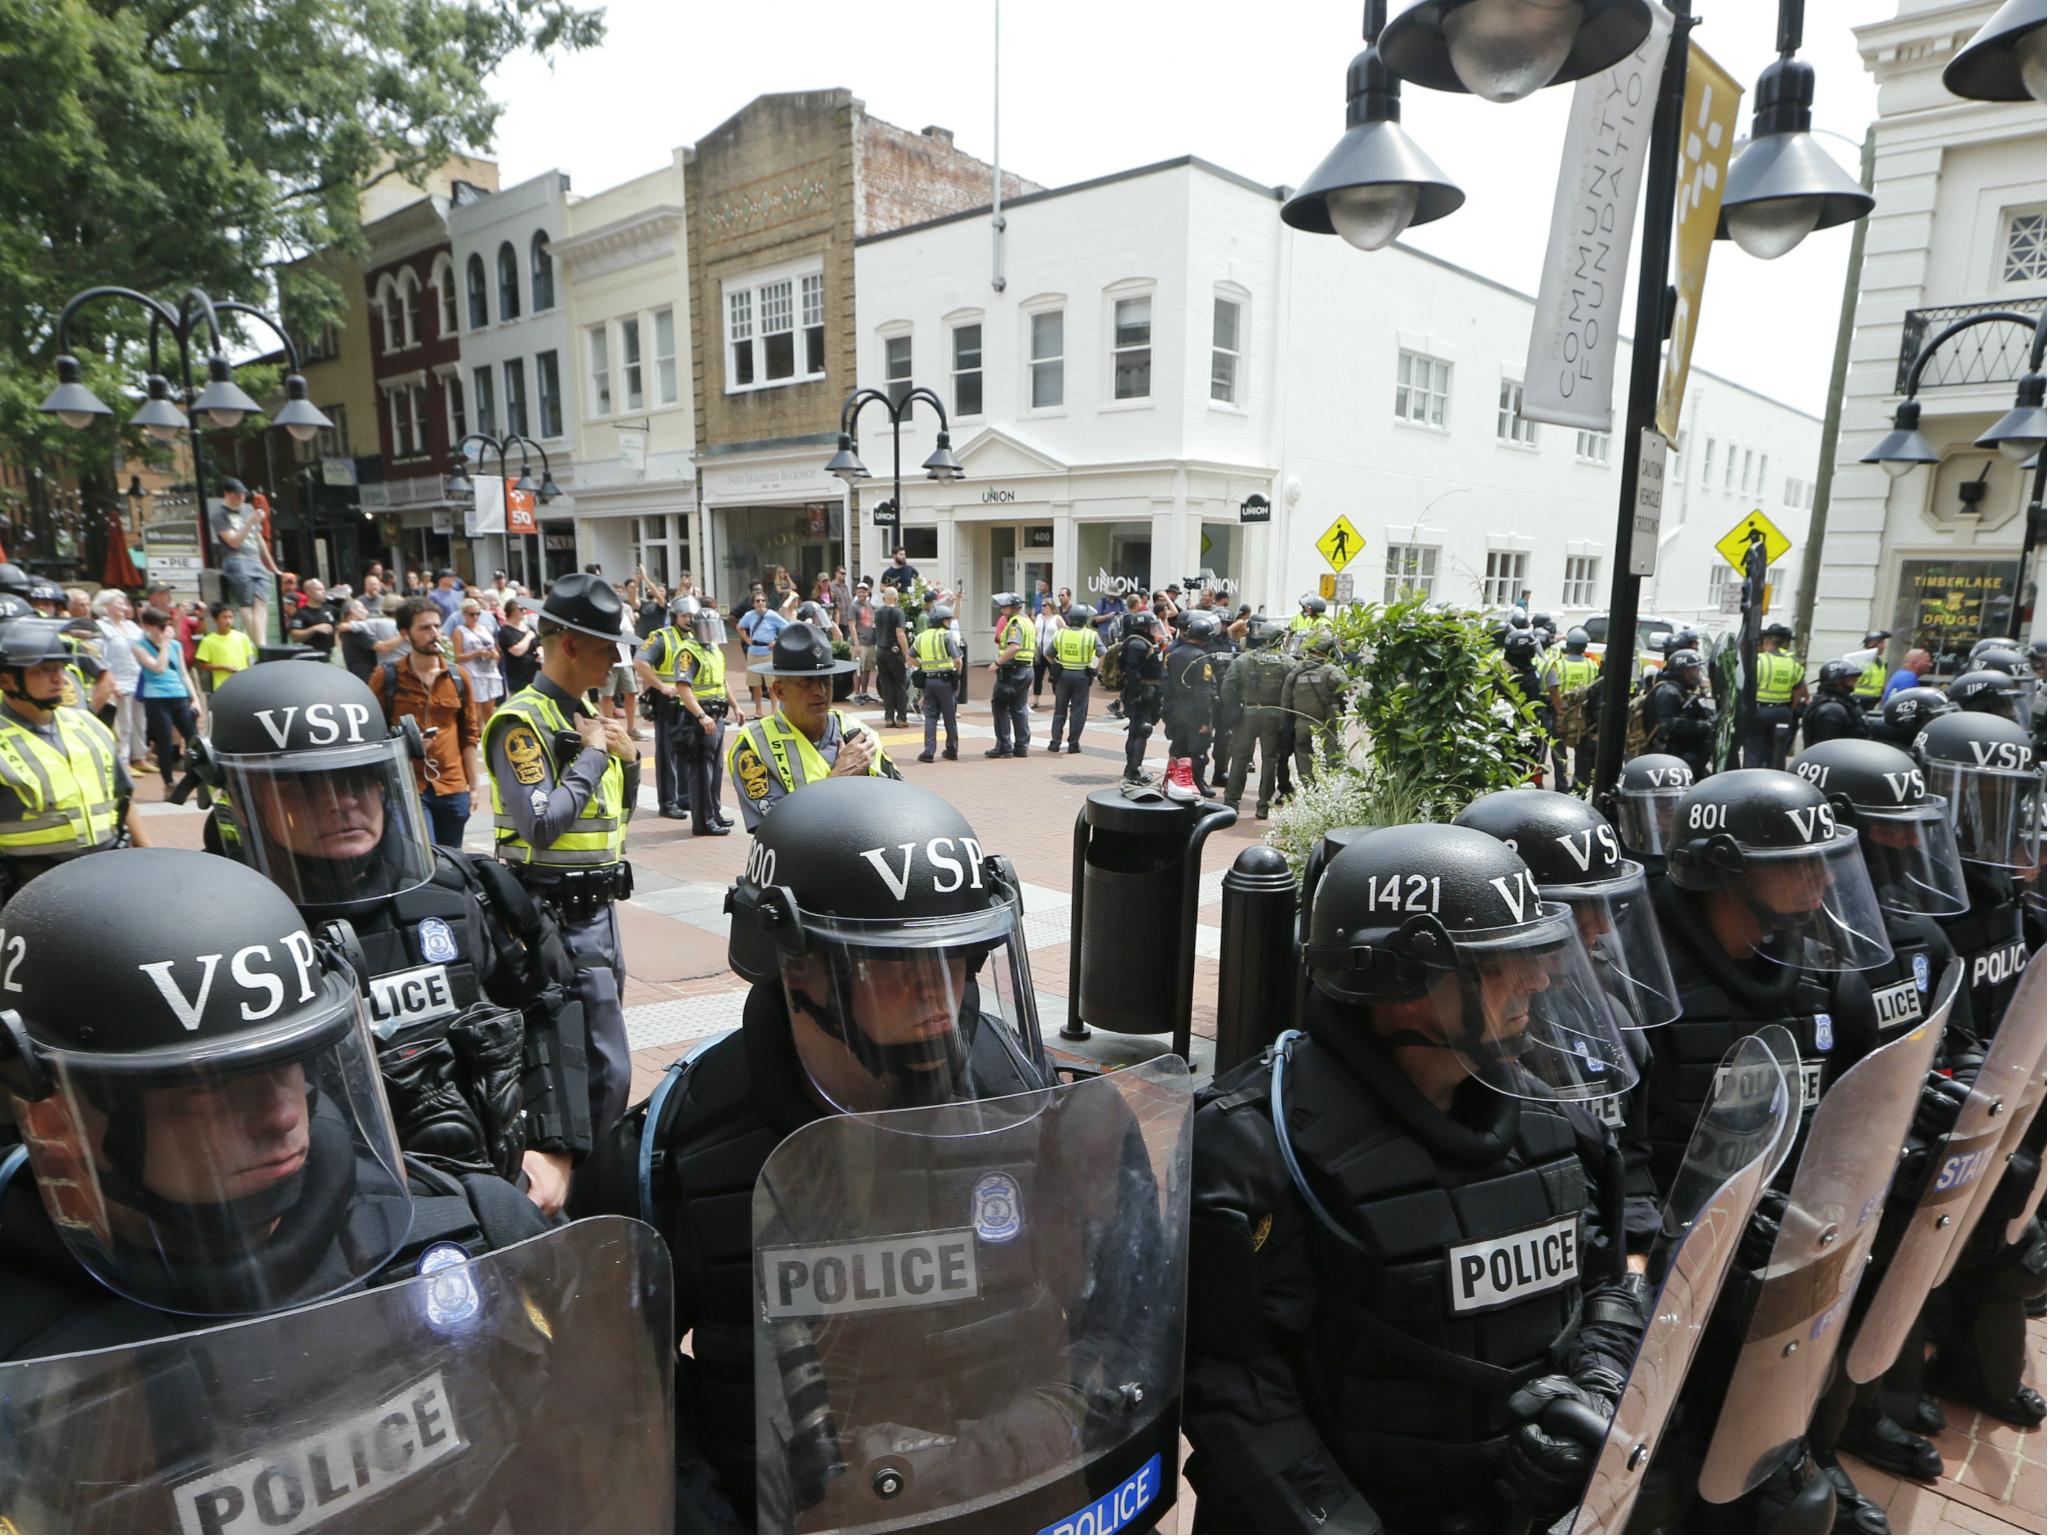 Virginia State Police cordon off an area around the site of several clashes between white supremacists and counter-protesters which resulted in the death a protester, two state police officers, and several injuries